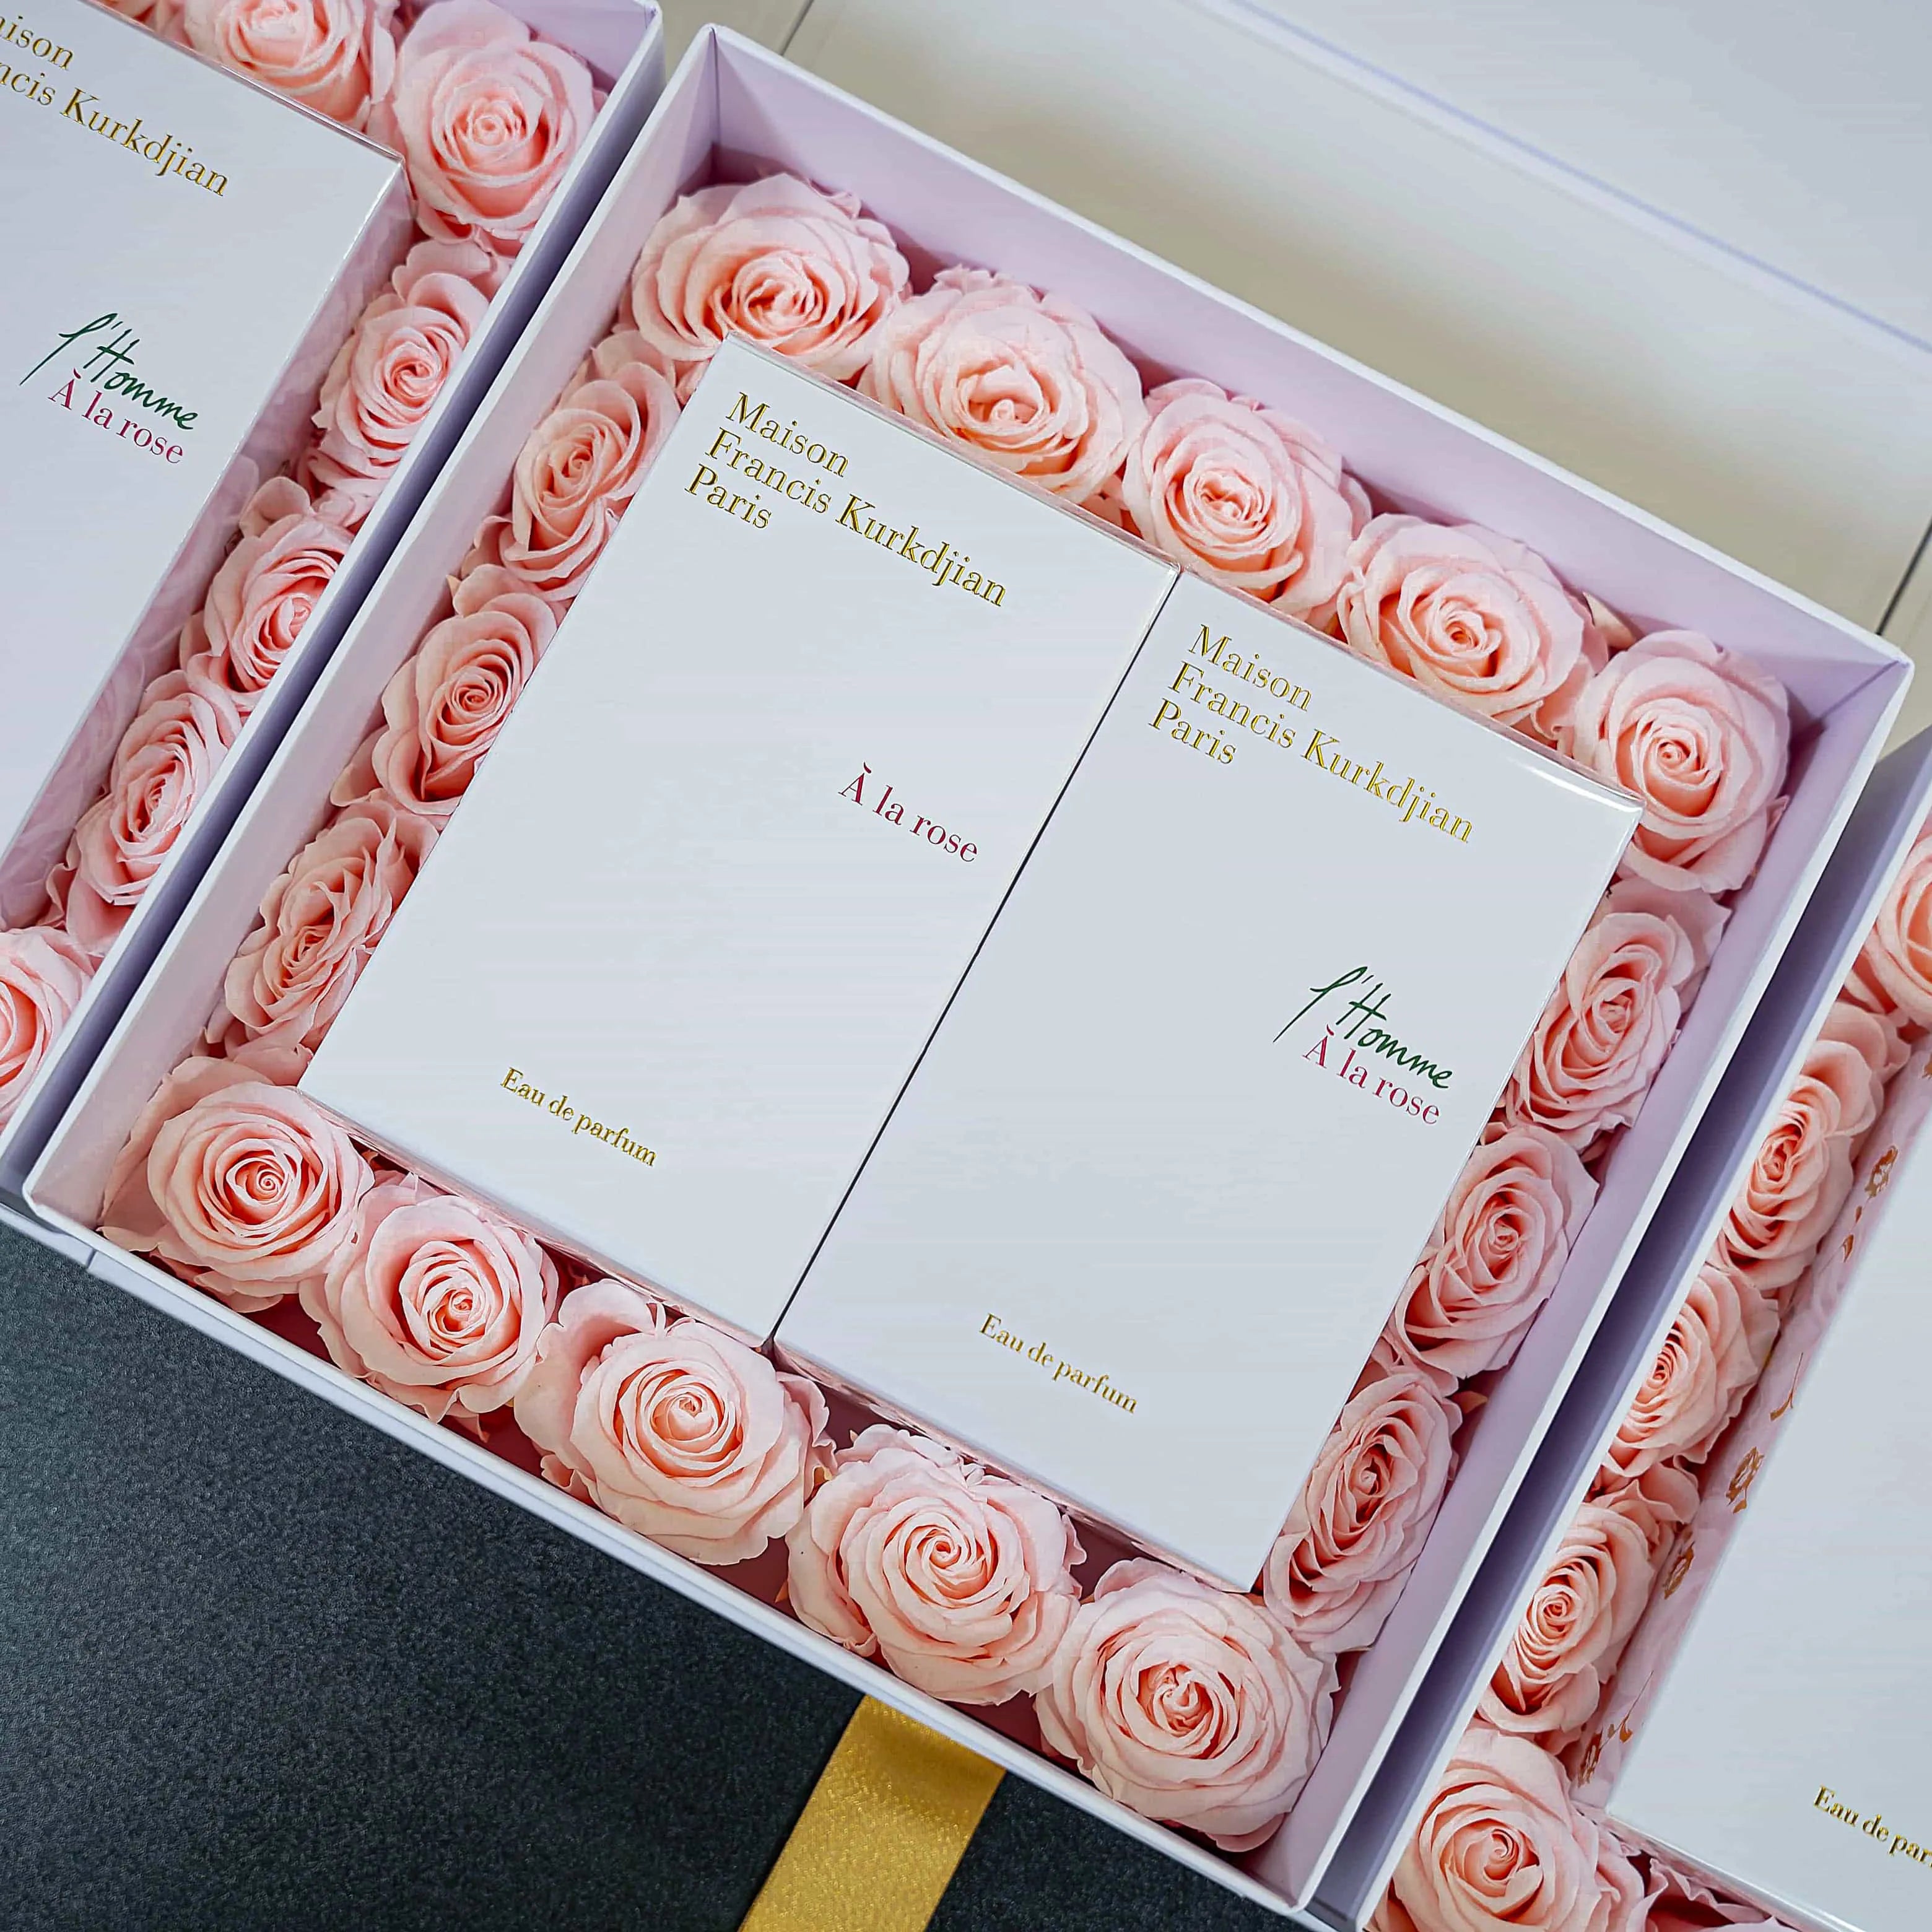 Naturally preserved light pink infinity roses are brought together with a luxurious perfume for an intimate influencer event